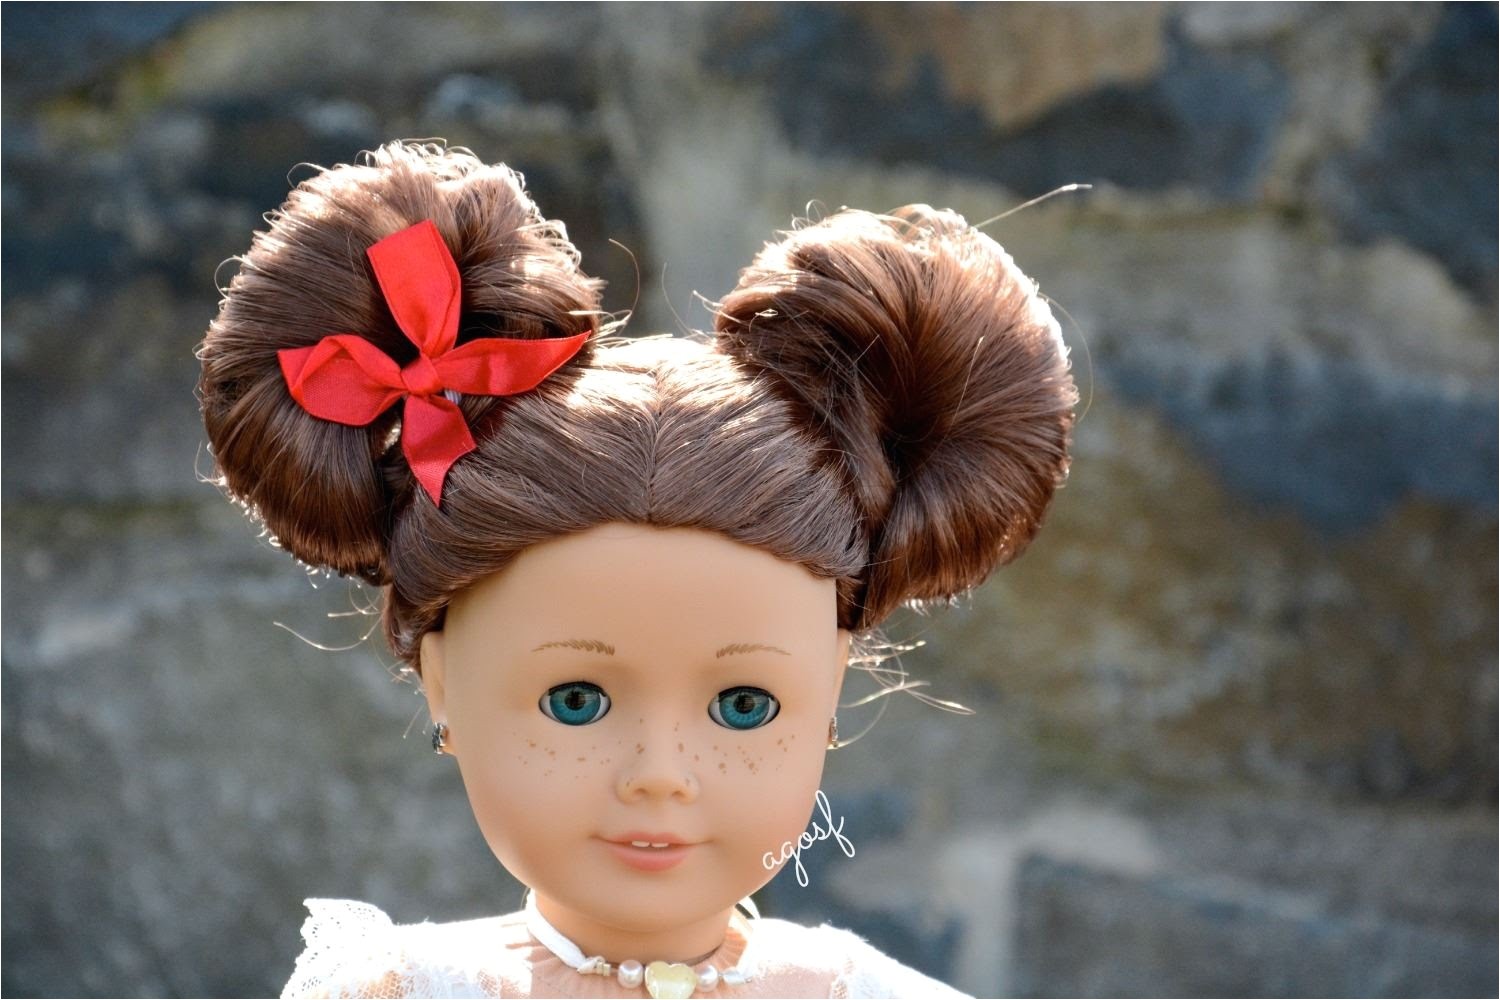 Picture Cute American Girl Doll Hairstyles Simple hairstyle ideas of Fancy Cute American Girl